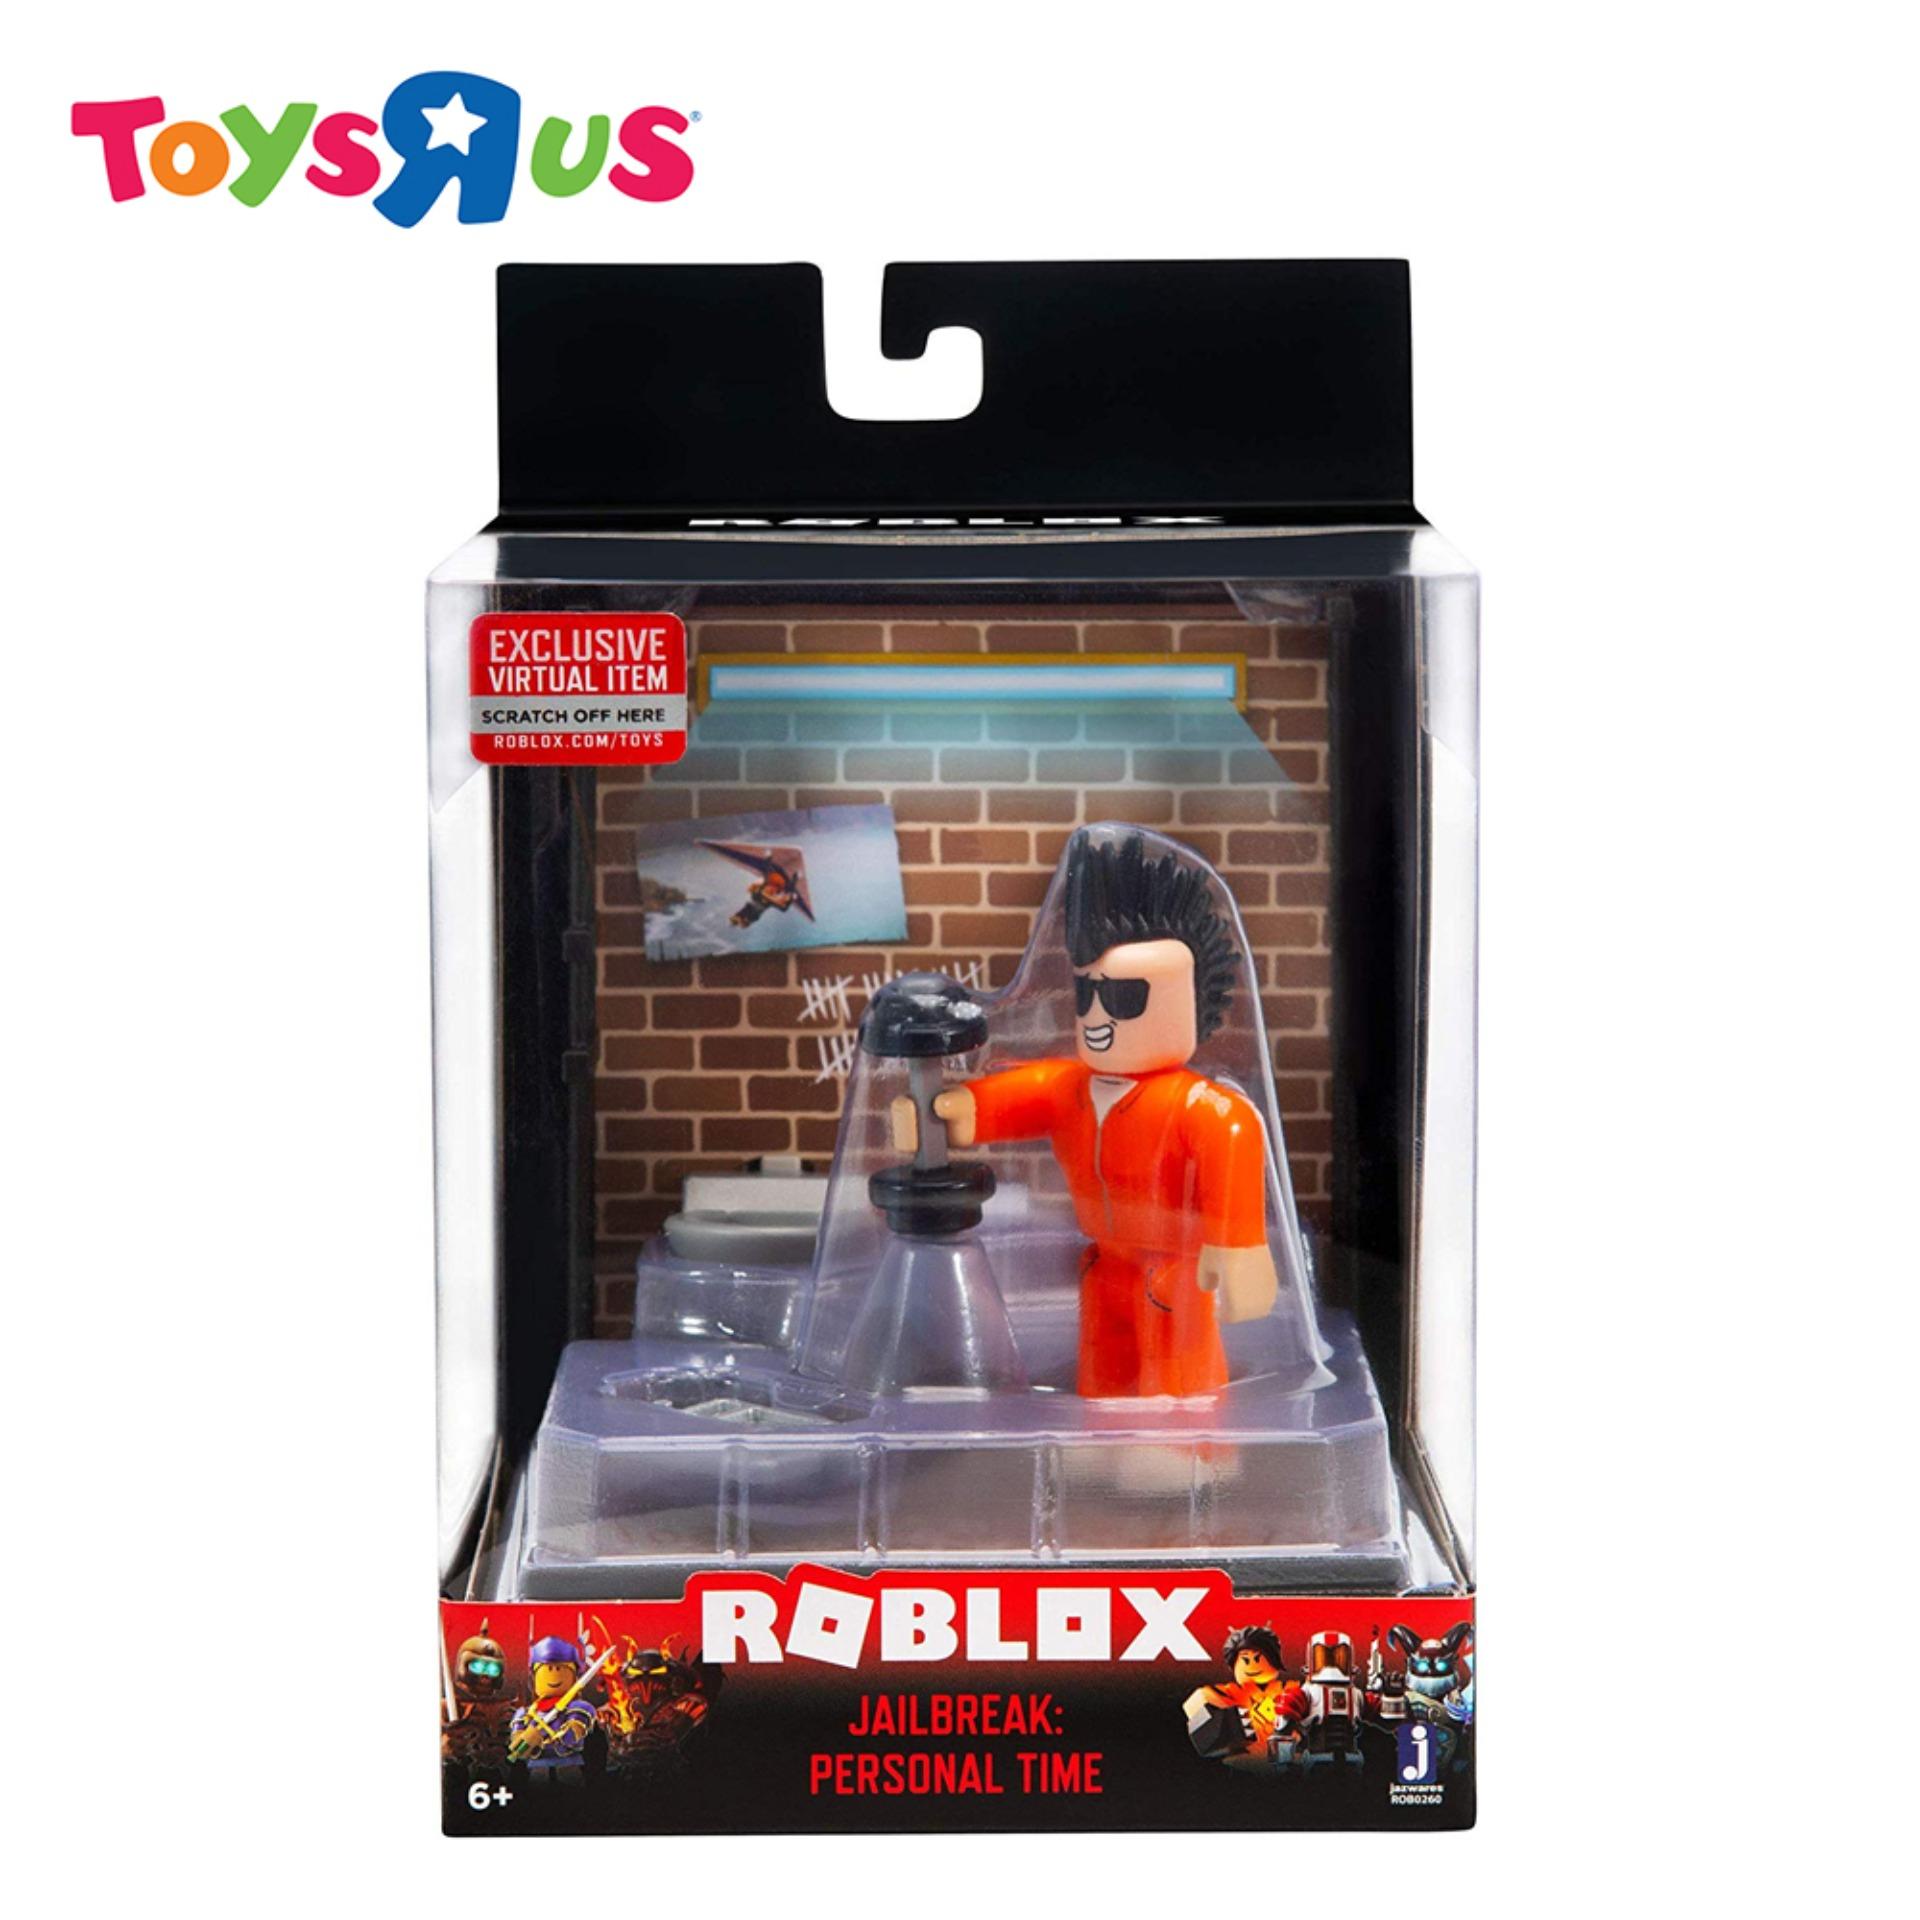 Roblox Jailbreak Personal Time Toys R Us